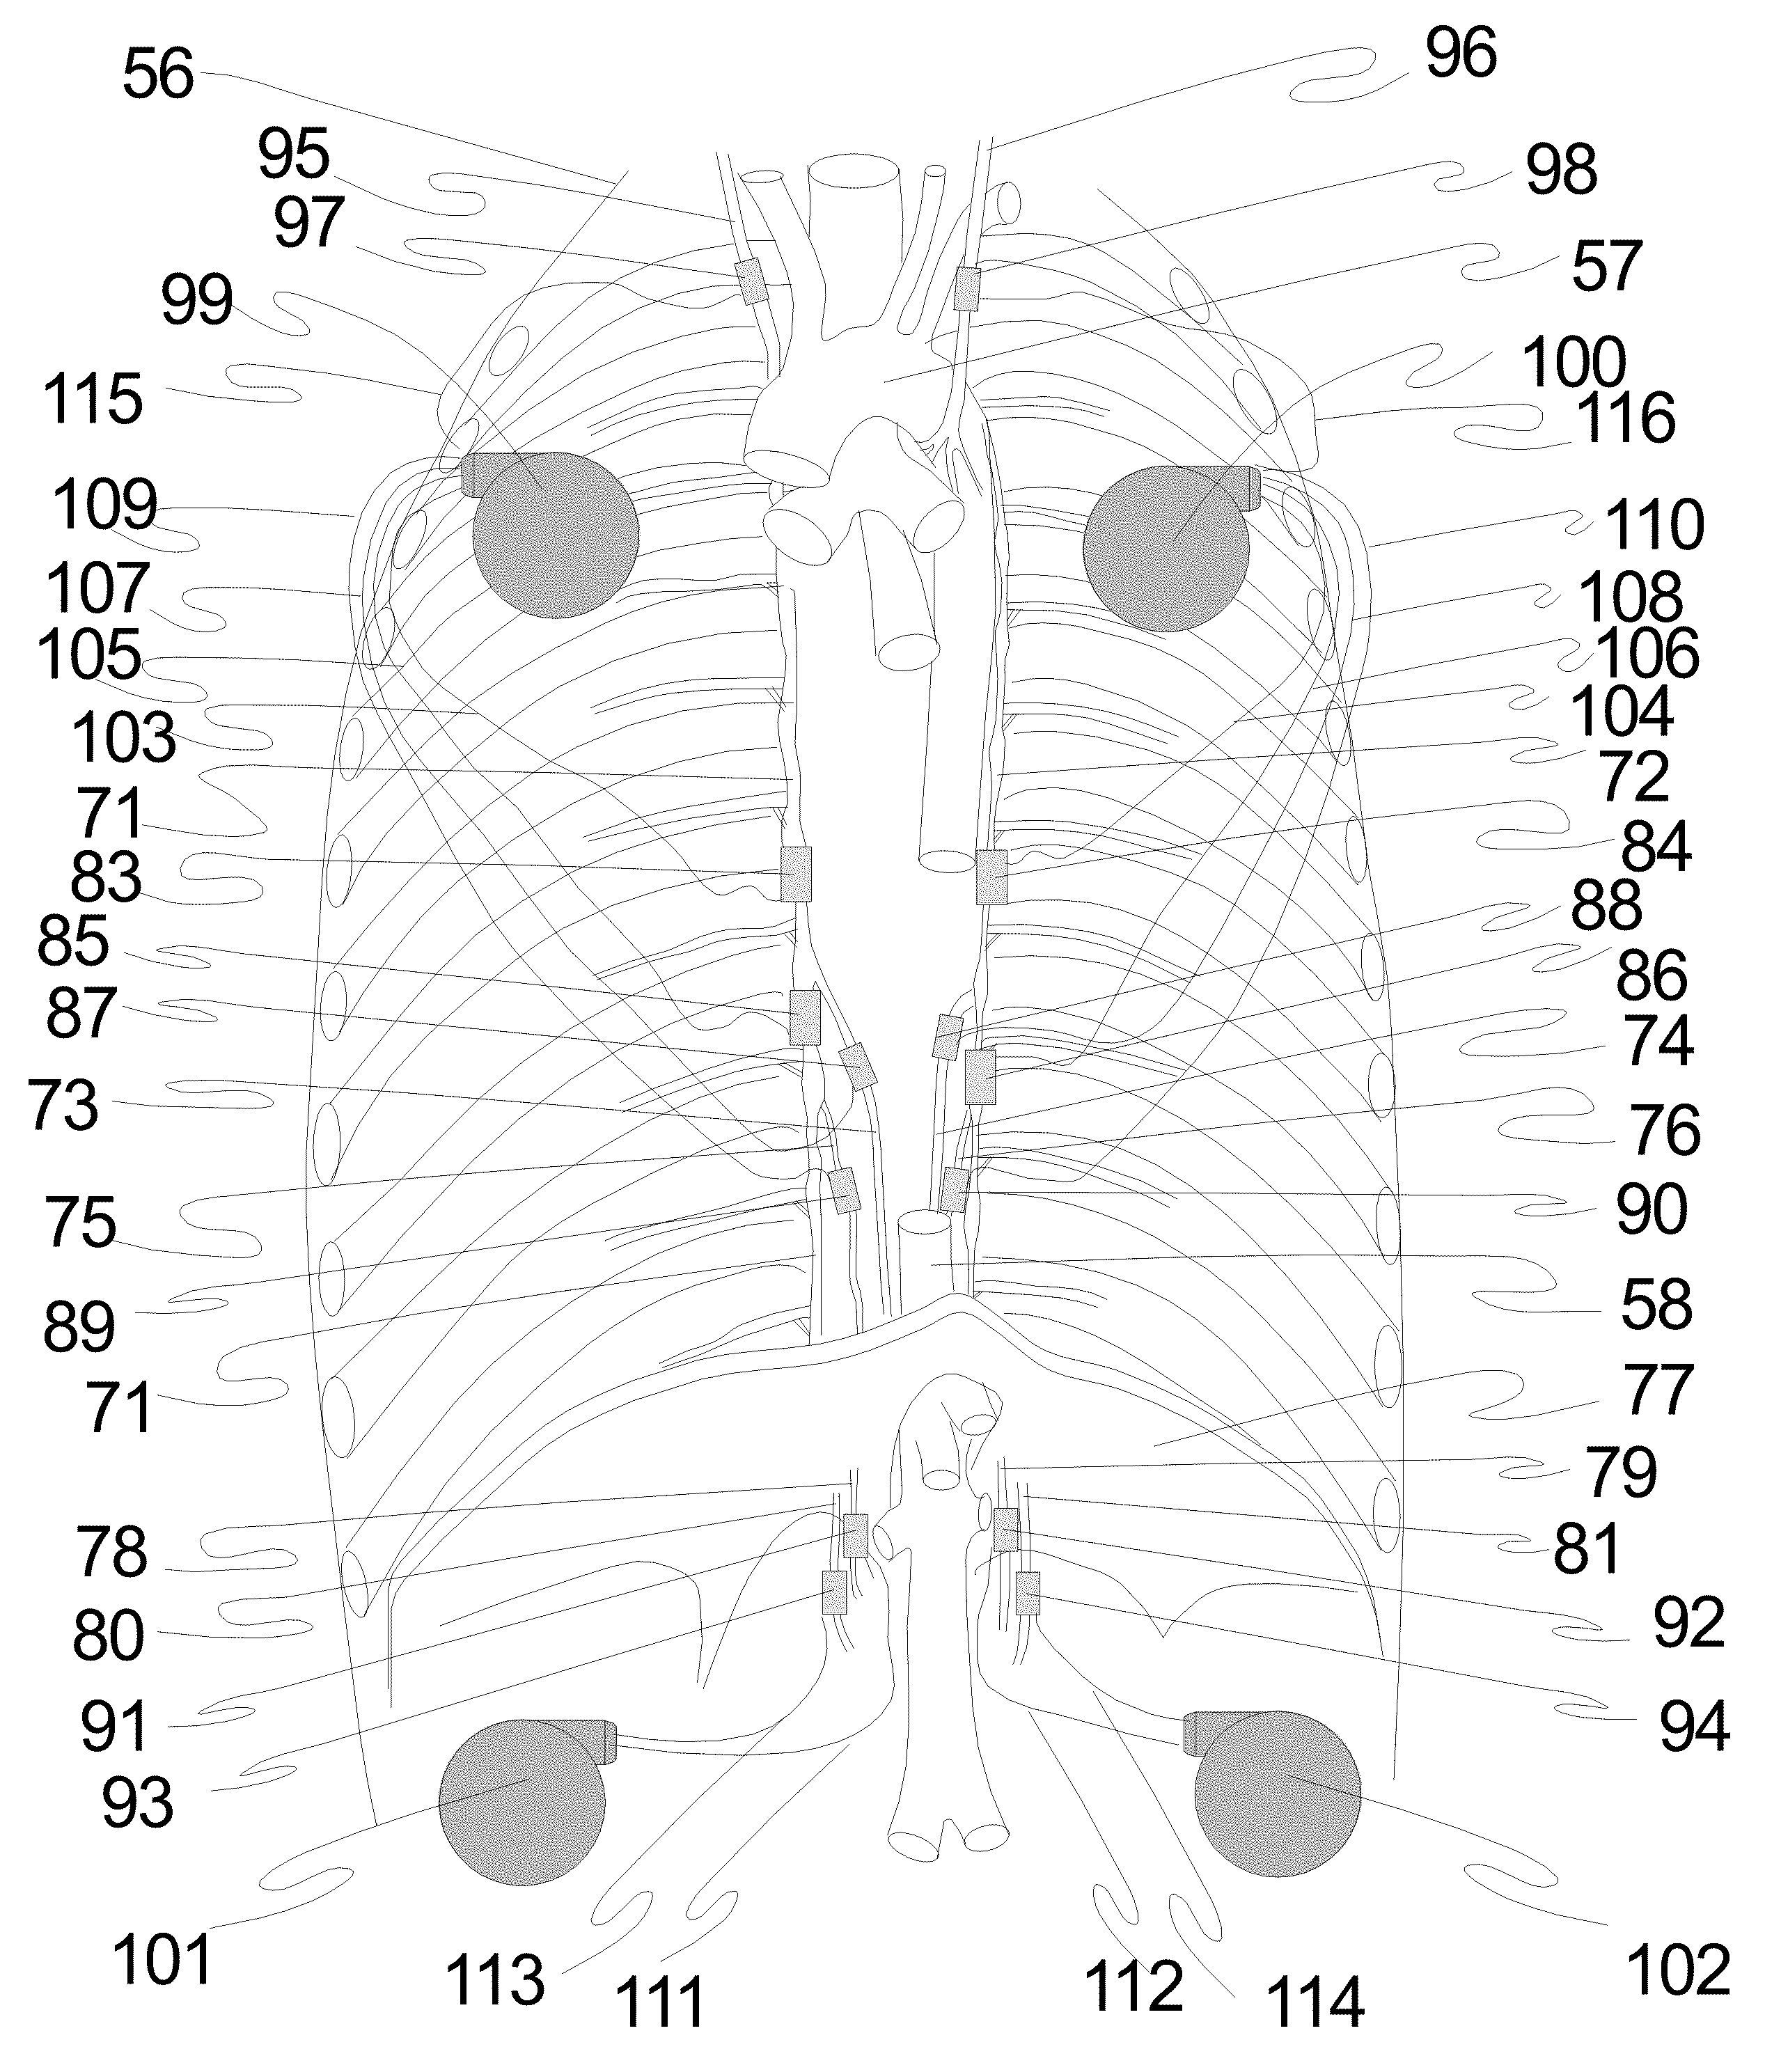 Apparatus for autonomic neuromodulation for the treatment of systemic disease